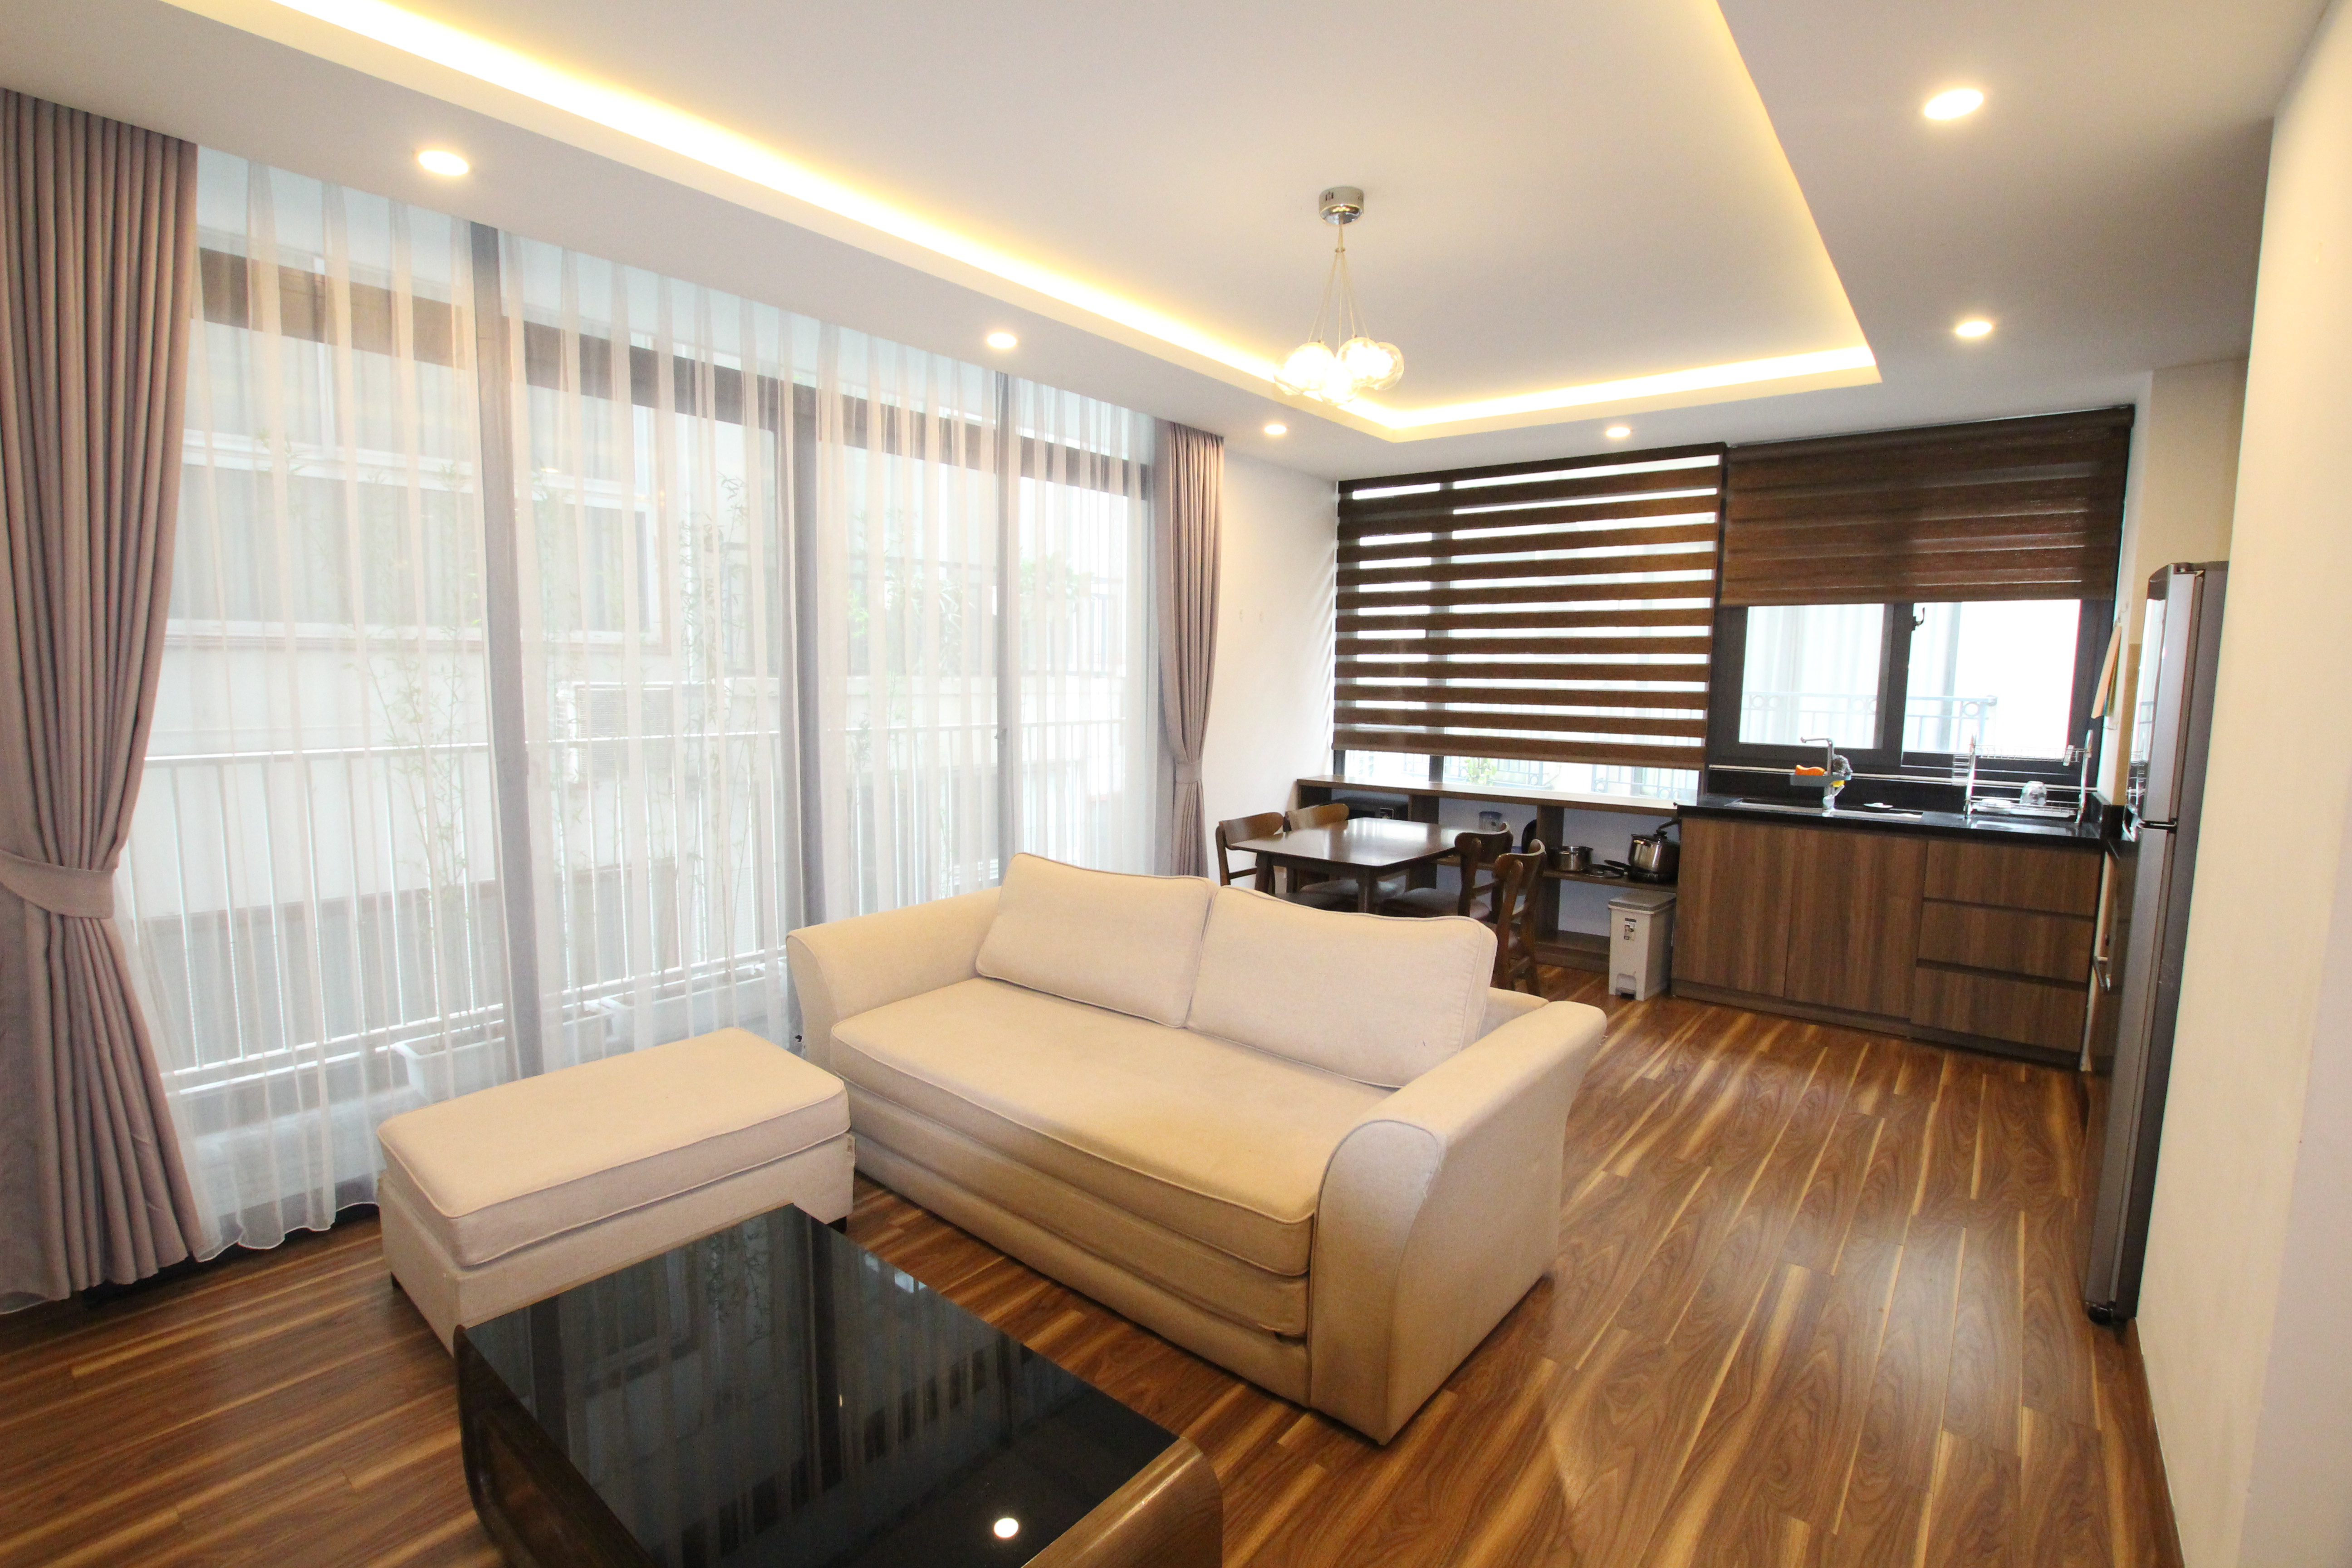 Modern 02 BR Apartment for rent in Tay Ho, near the Lake